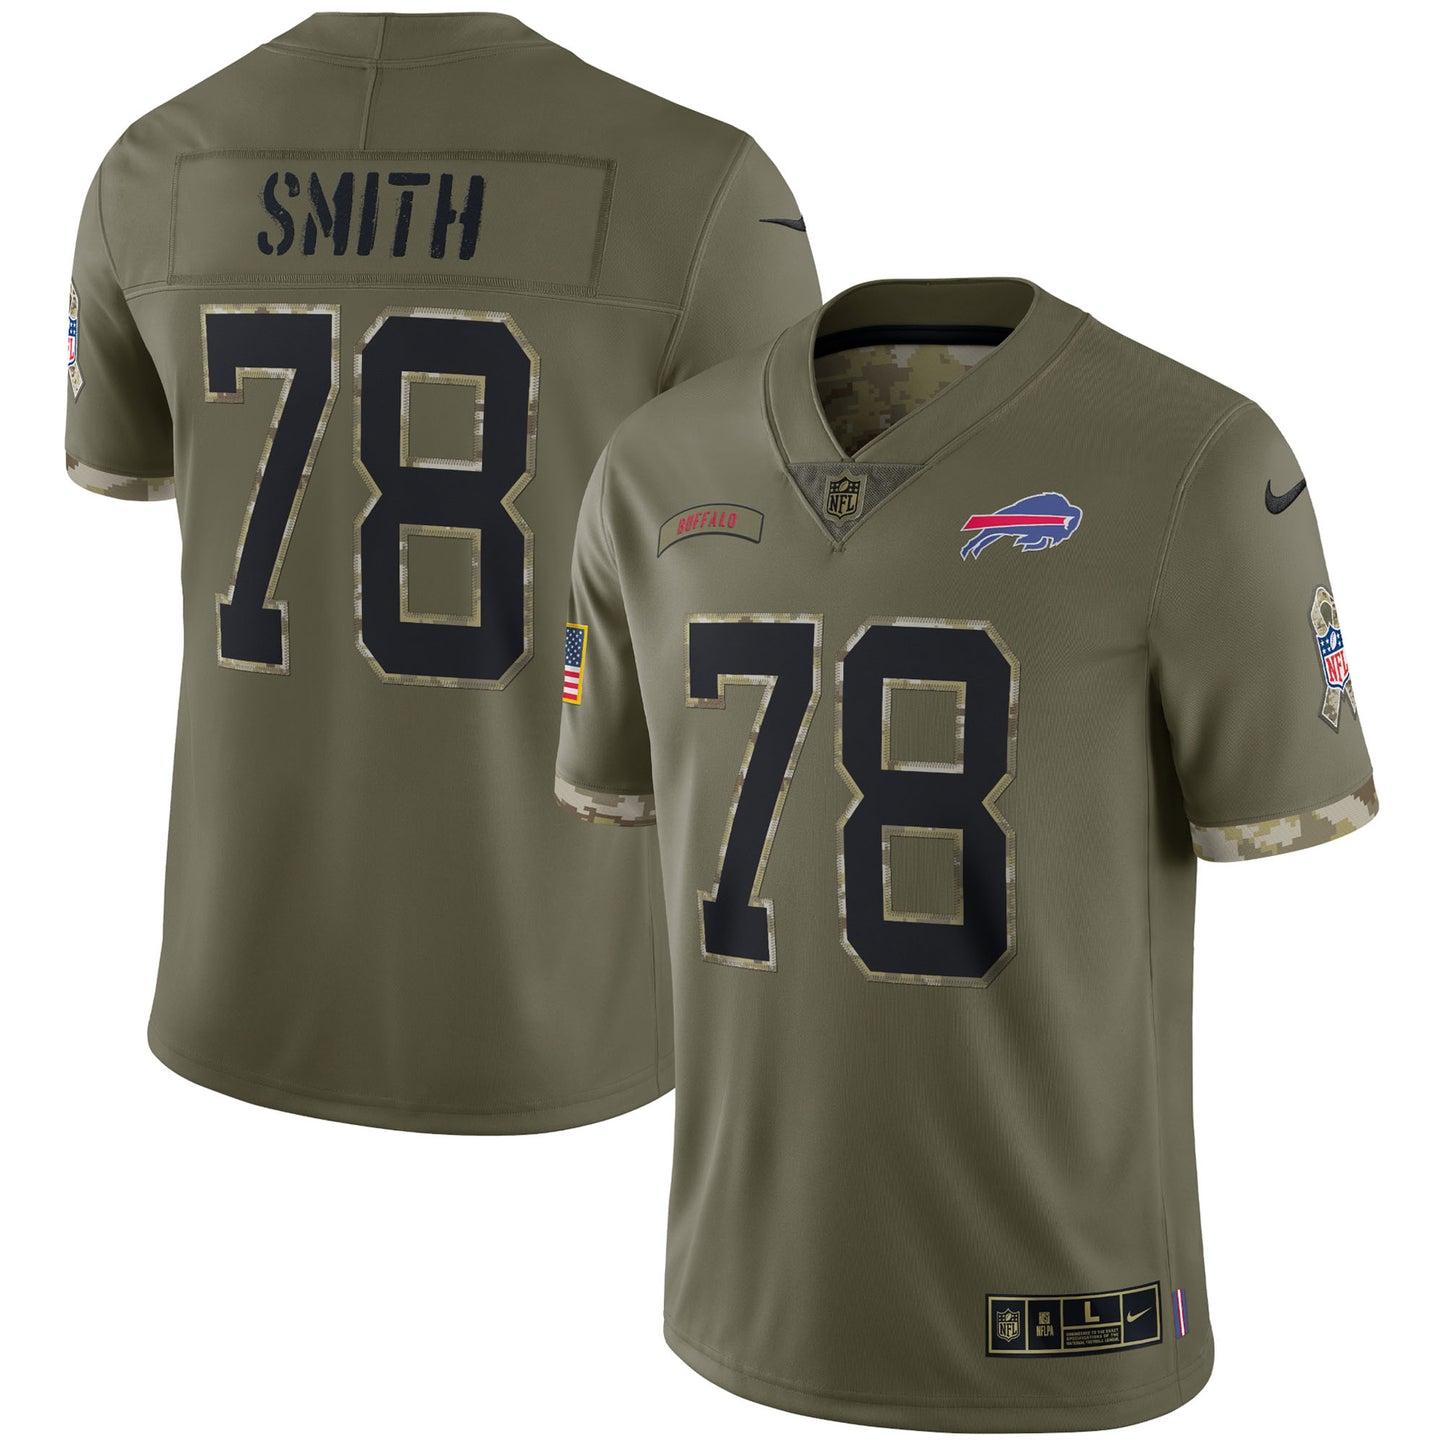 Bruce Smith Buffalo Bills 2022 Salute To Service Retired Player Limited Jersey - Olive